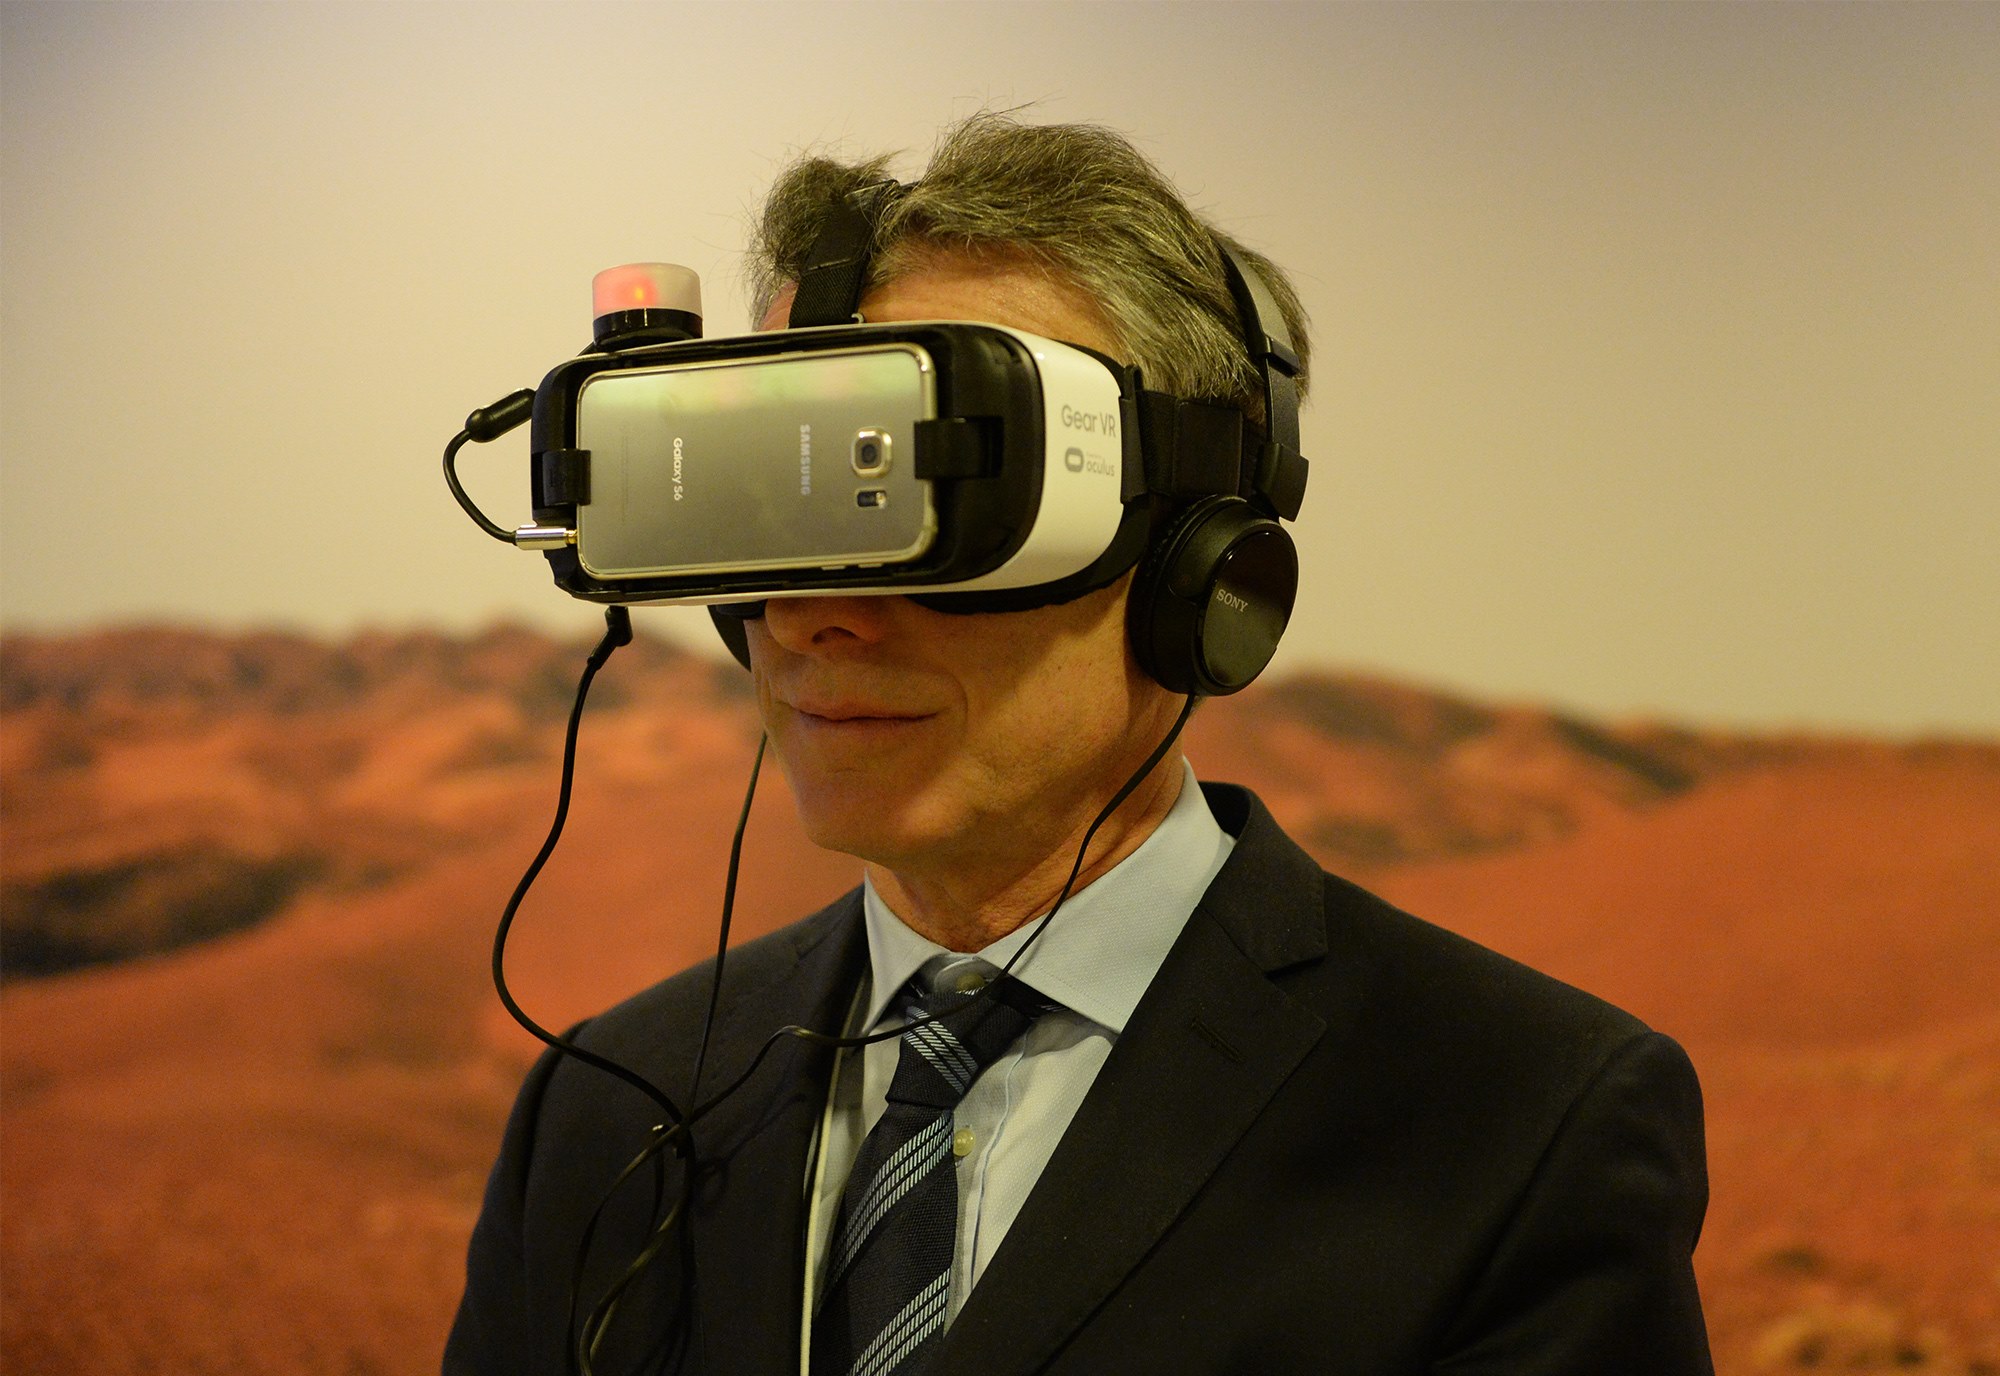 Macri tests out virtual reality headgear in Davos, Switzerland.